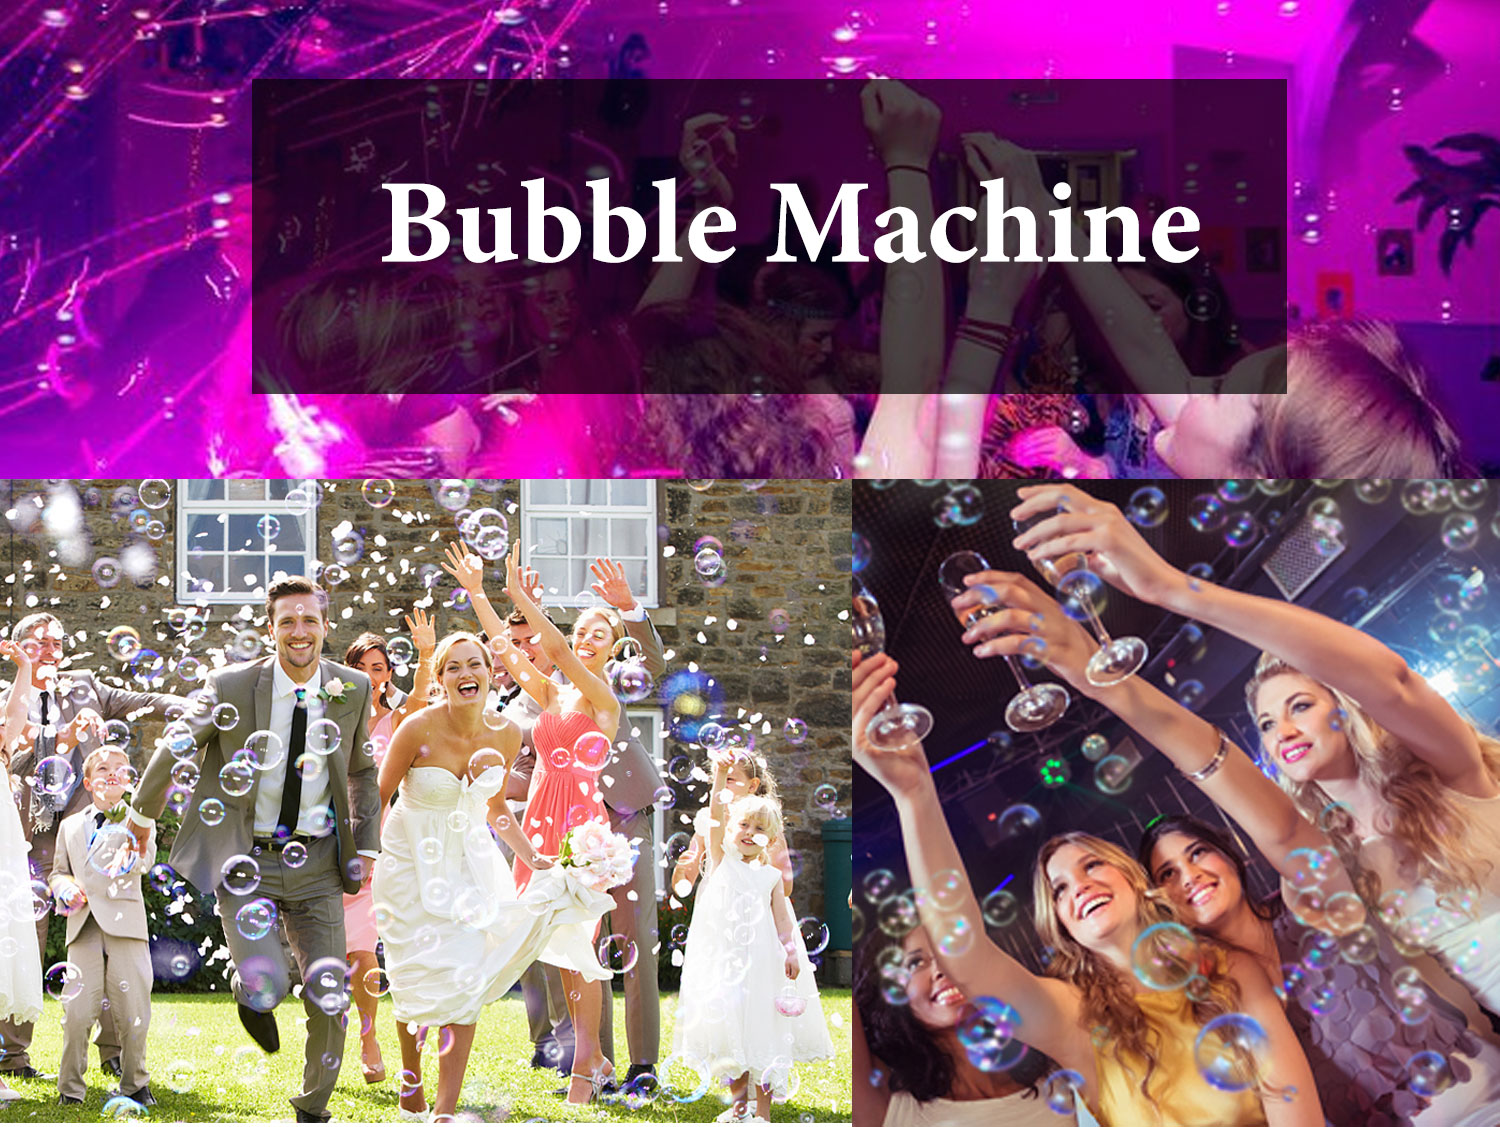 Bubble Machine in action at a Sri Lankan wedding